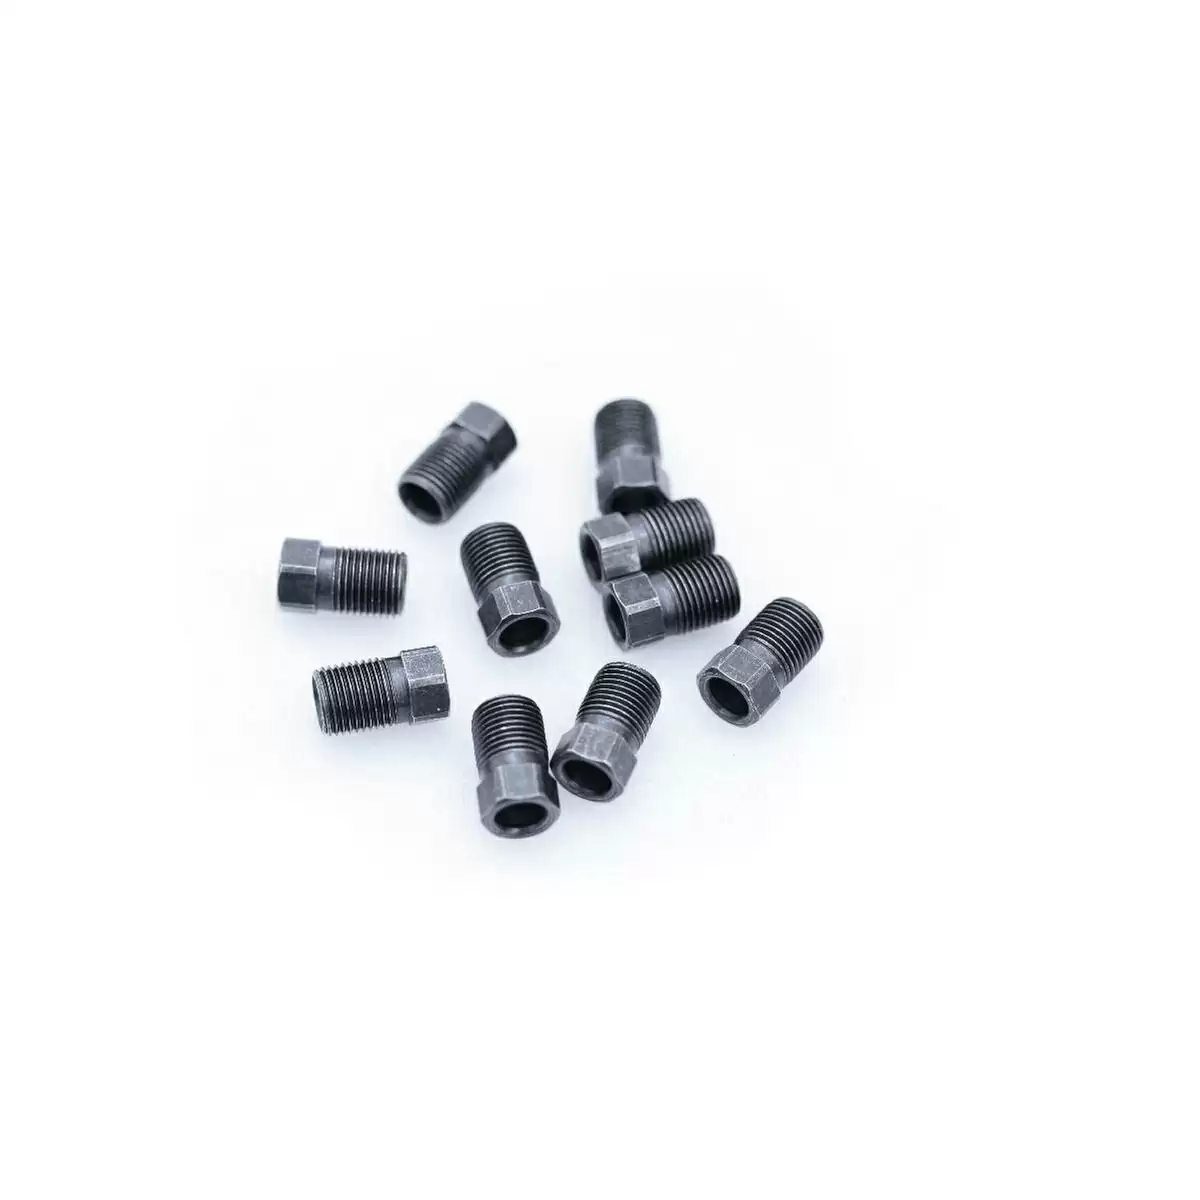 Sleeve Nut M8x0.75 Not for MT Brakes 1pc - image